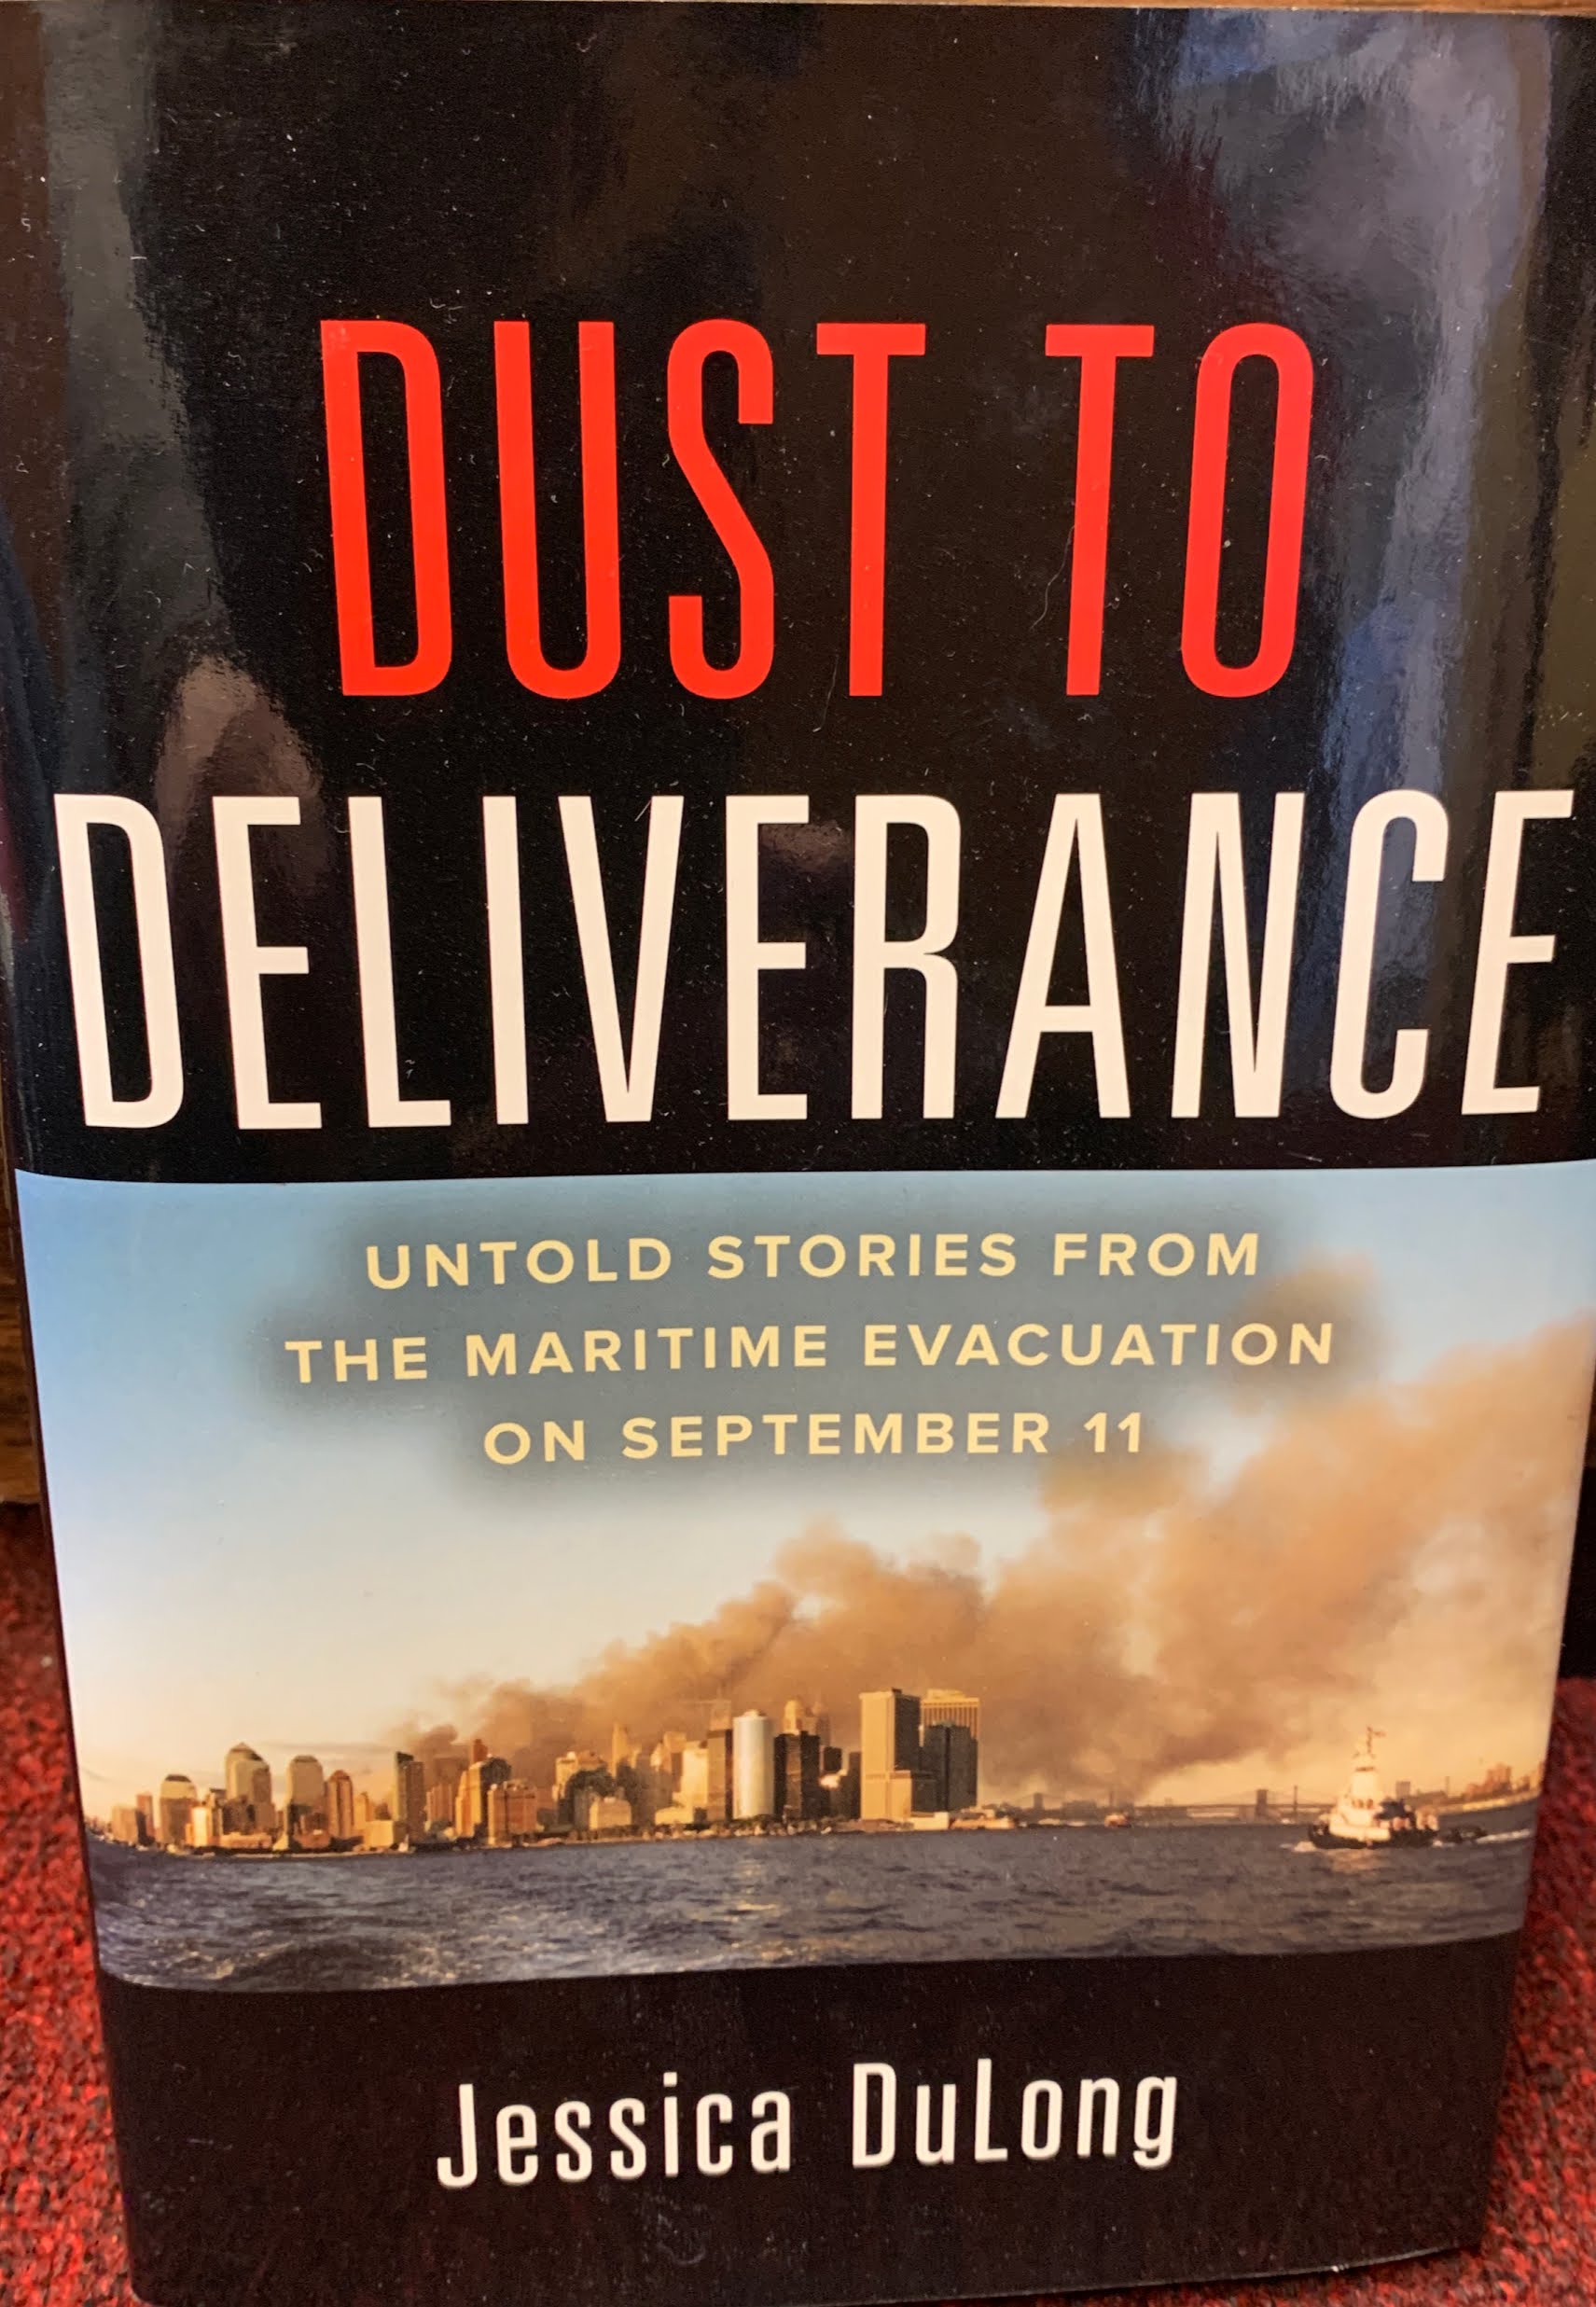 Dust to Deliverance - The Maritime Evacuation of 9/11